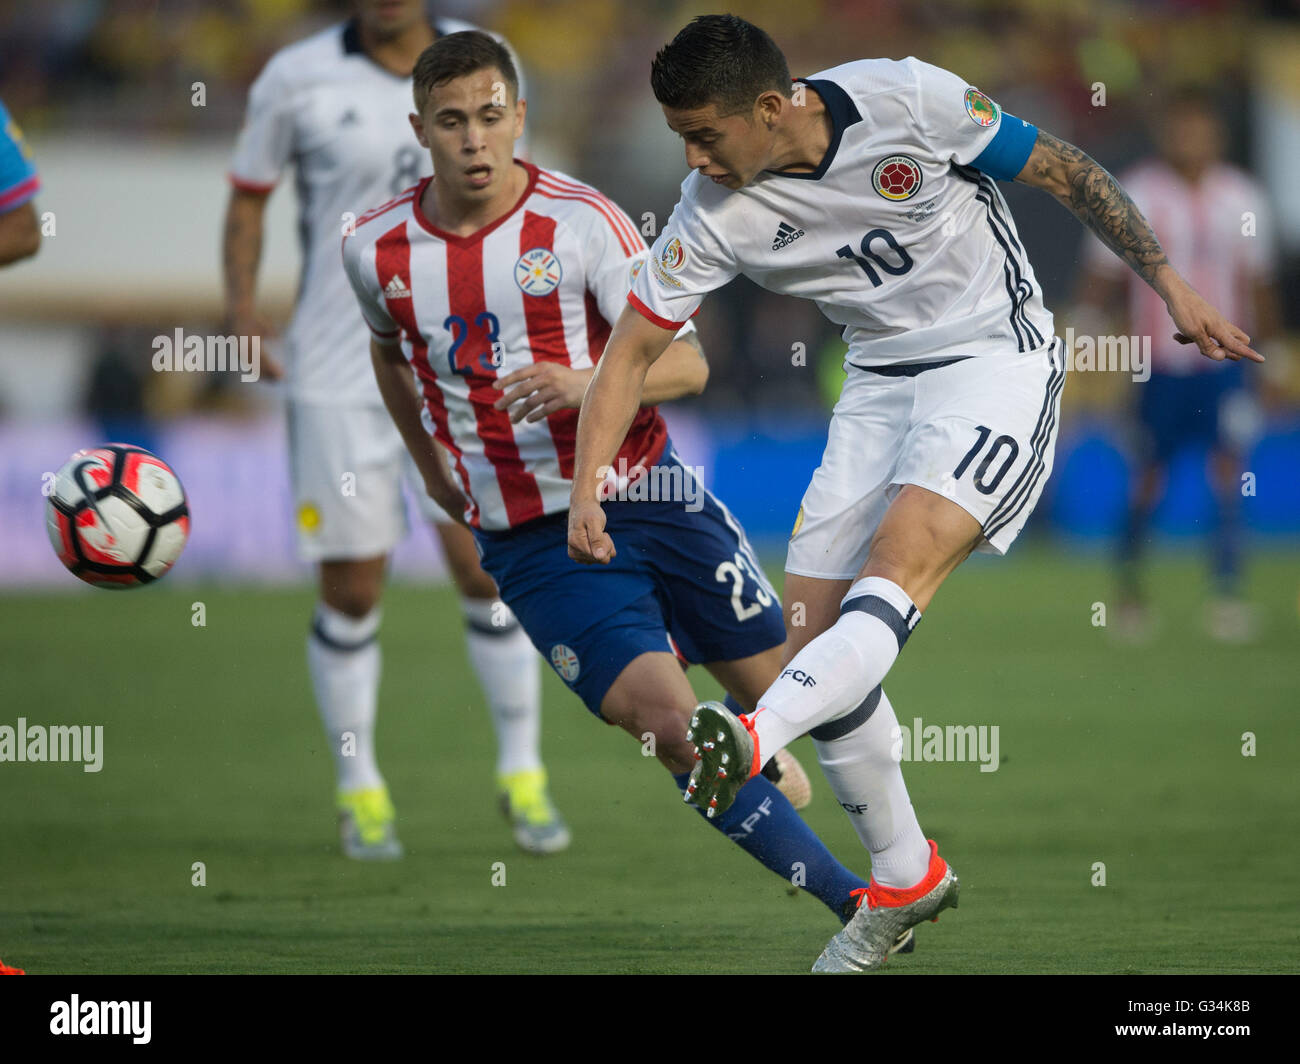 Pasadena, USA. 7th June, 2016. Colombia's James Rodriguez (R) shoots during the Copa America Centenario Group A match between Colombia and Paraguay at Rose Bowl Stadium in Pasadena, California, the United States, June 7, 2016. © Yang Lei/Xinhua/Alamy Live News Stock Photo